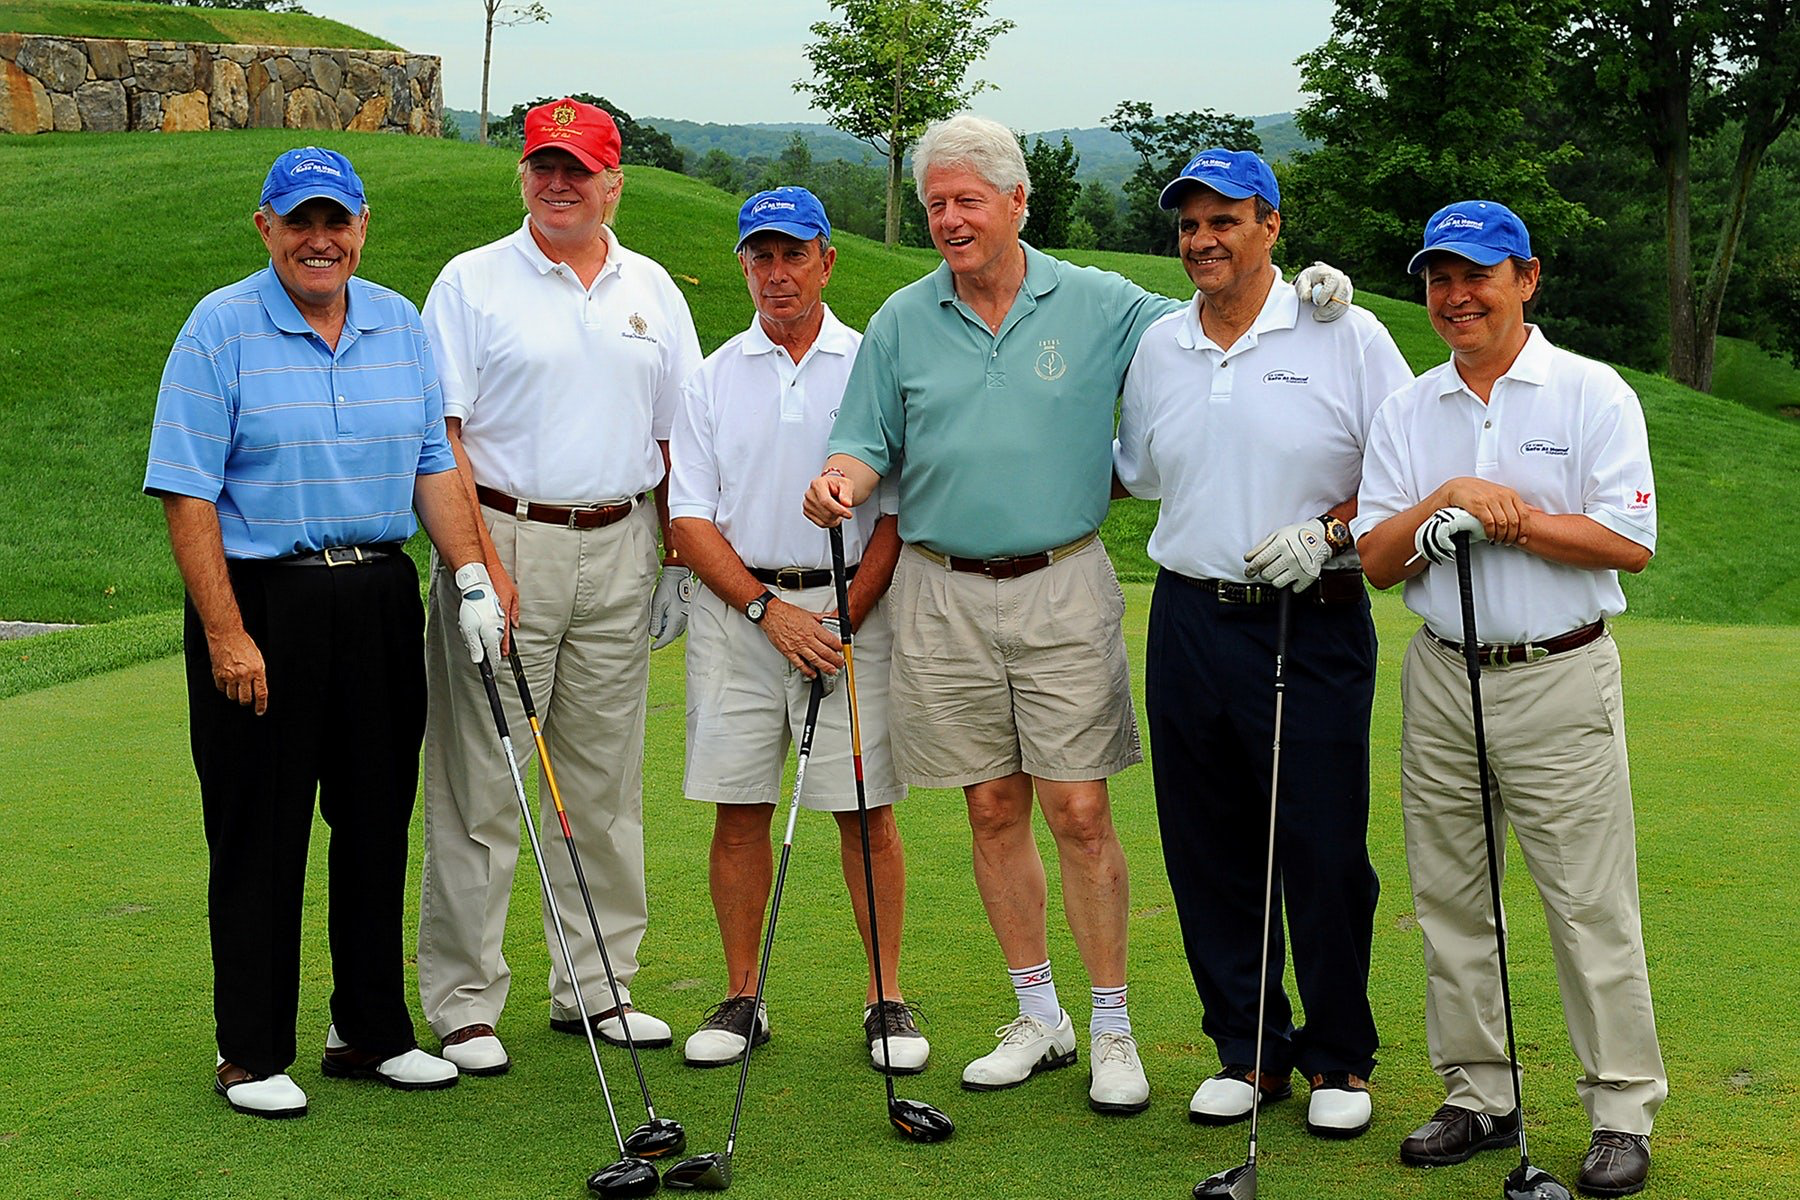 Chatting the Pictures: Trump Bloomberg Golf Photo; Xi Masked; Elizabeth Warren’s Glass Ceiling